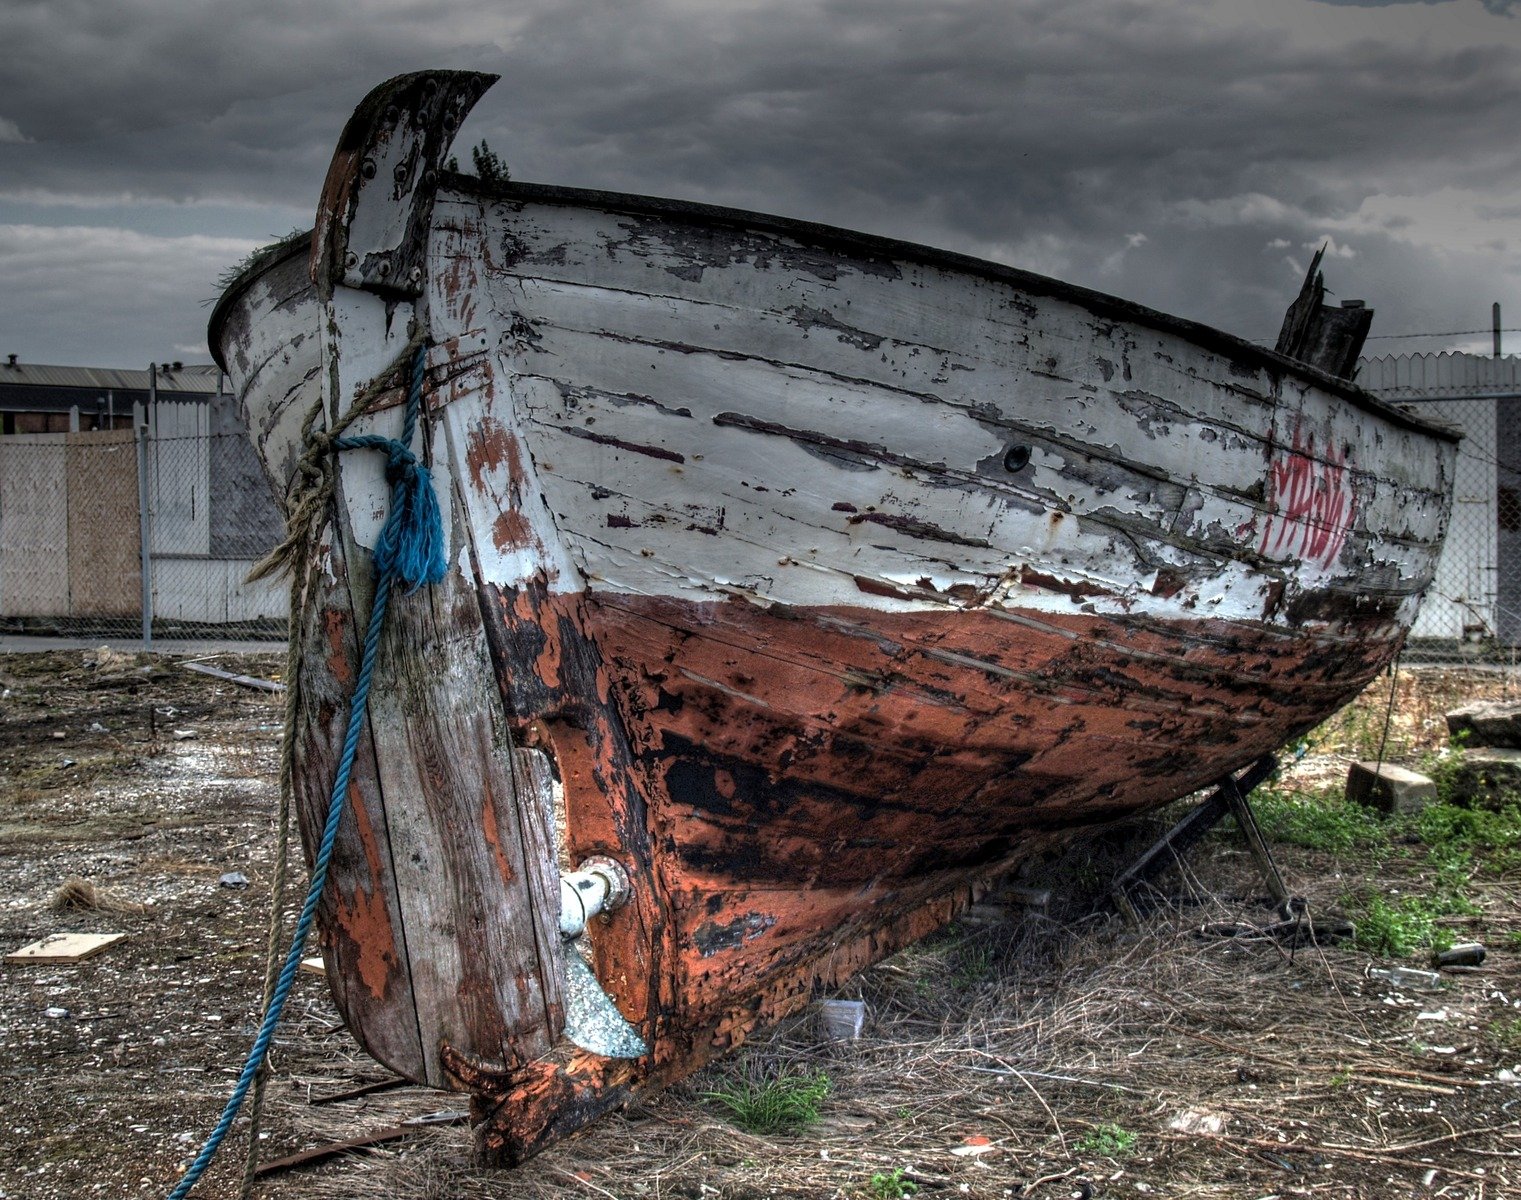 old rusty boat left on land in abandoned city